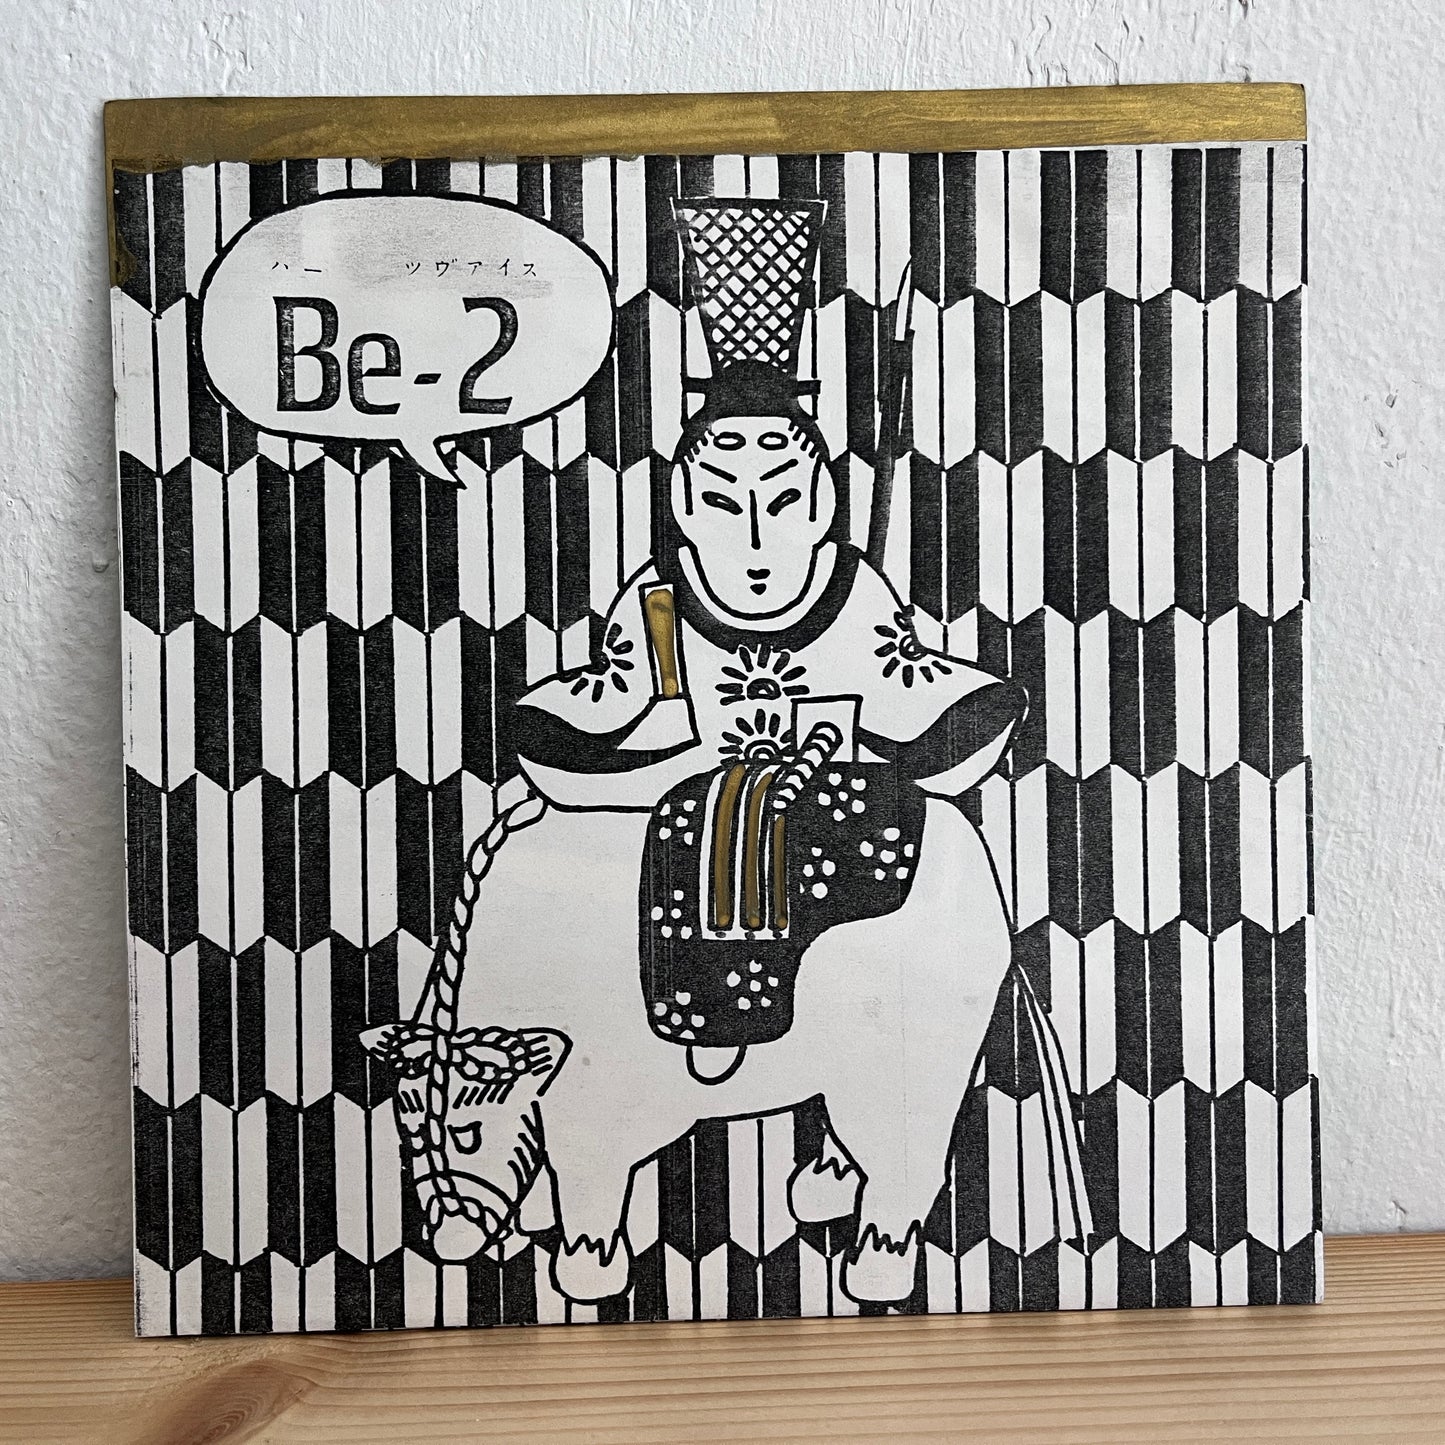 Be-2 – Be-2